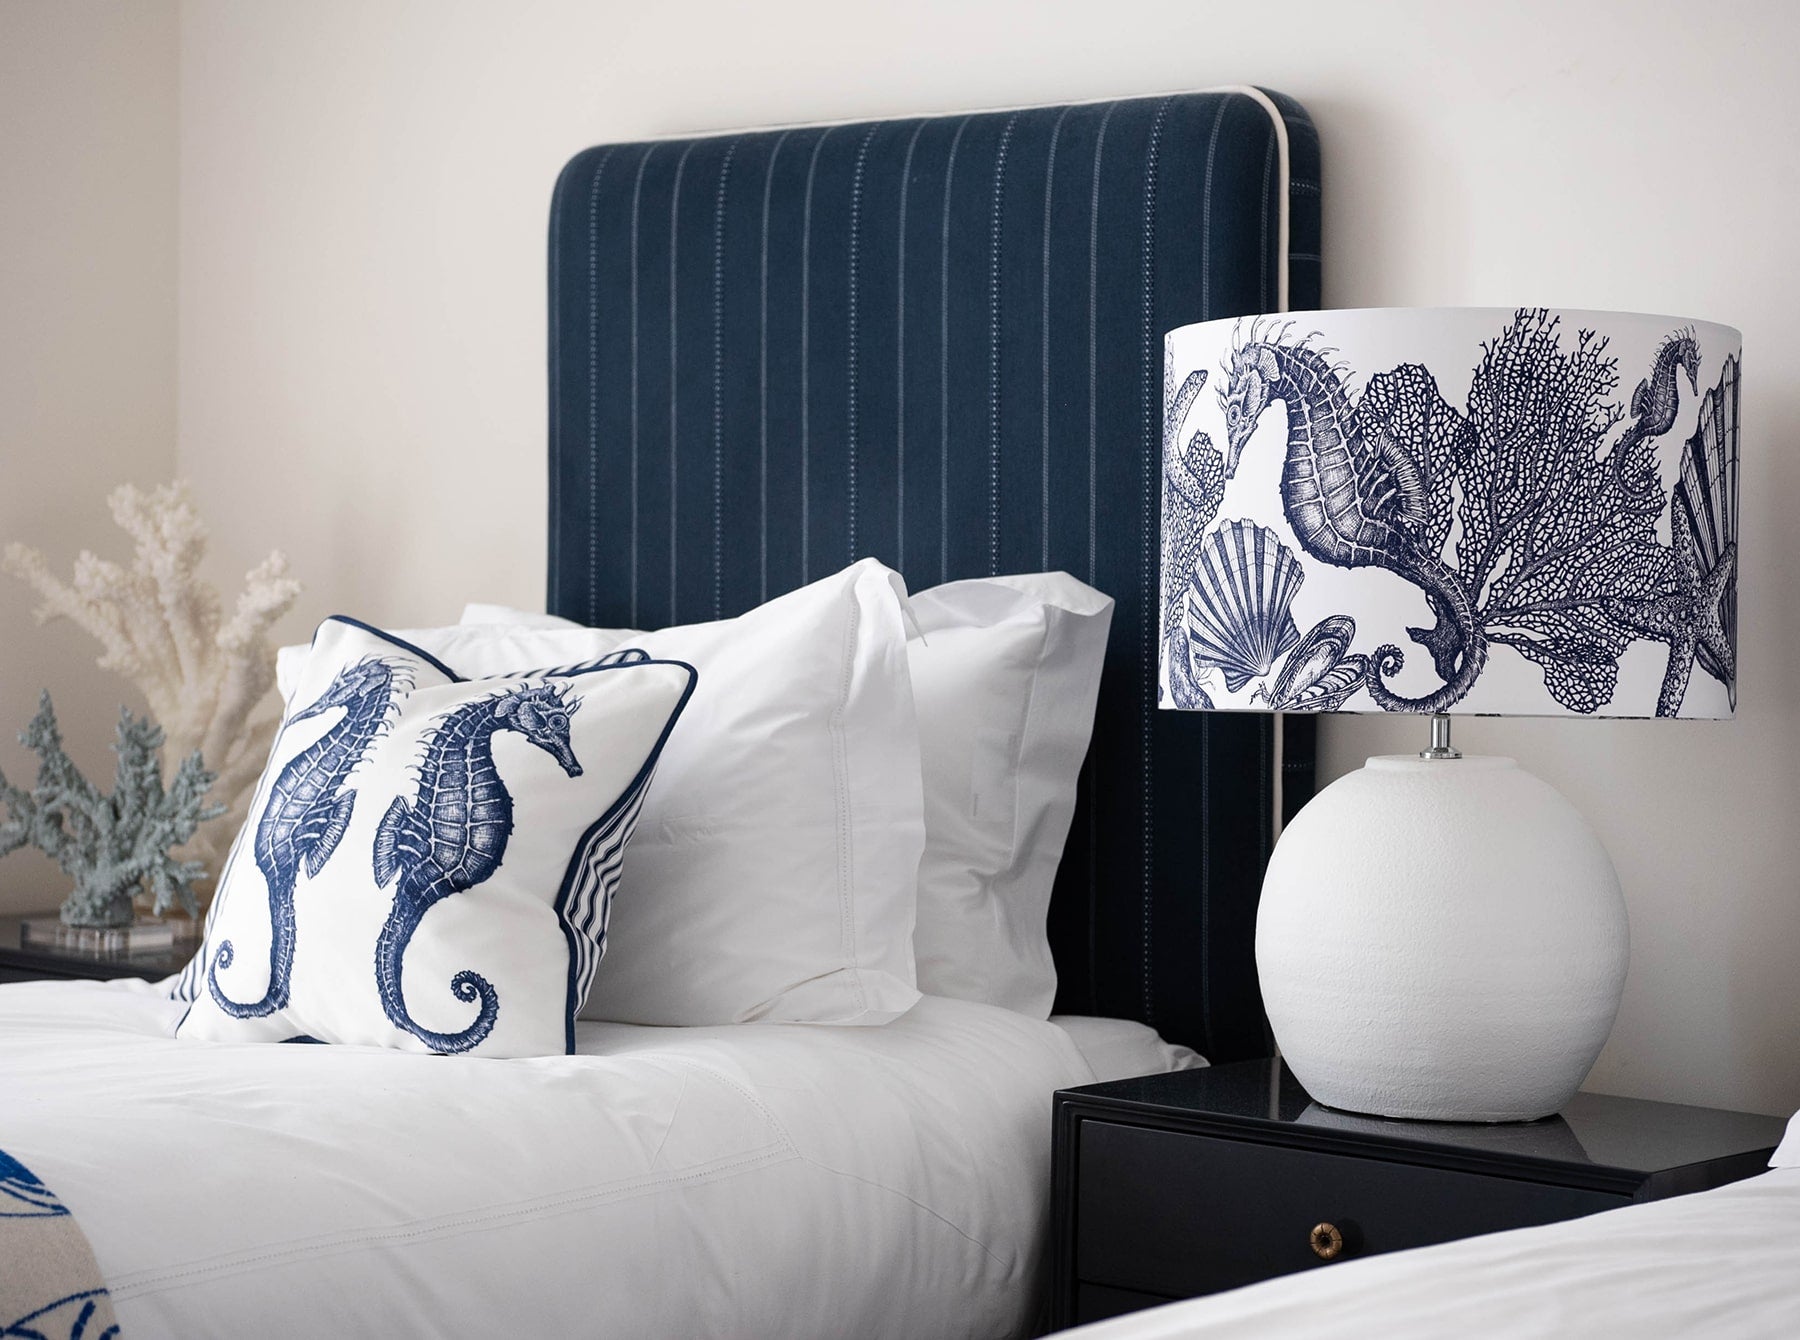 Our Classic Navy Seahorse design on a white background on a white lampbase on a side table between two single beds.On one of the beds you can see our classic cushions with a seahorse design.